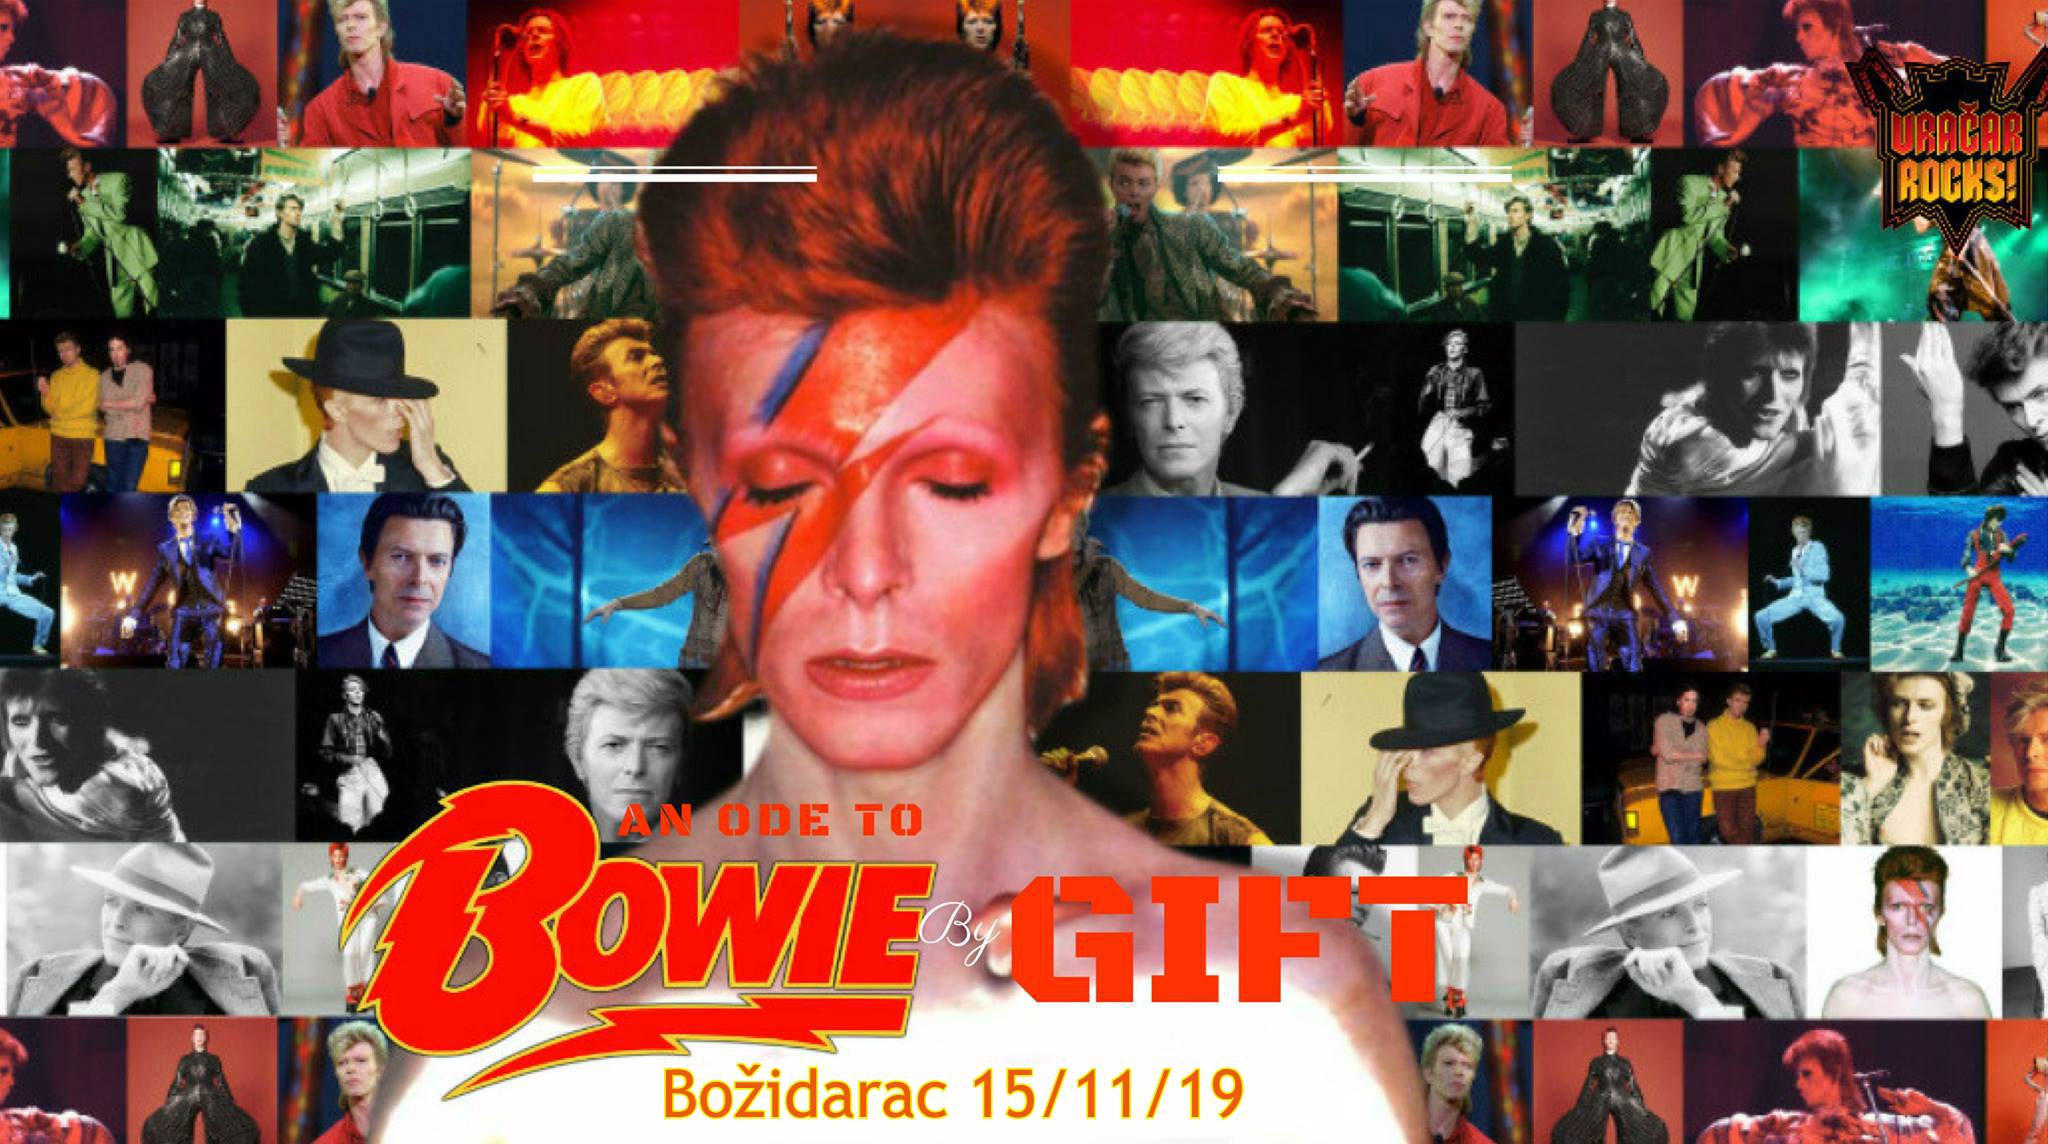 An ode to David Bowie by GIFT  15.11.2019 Božidarac